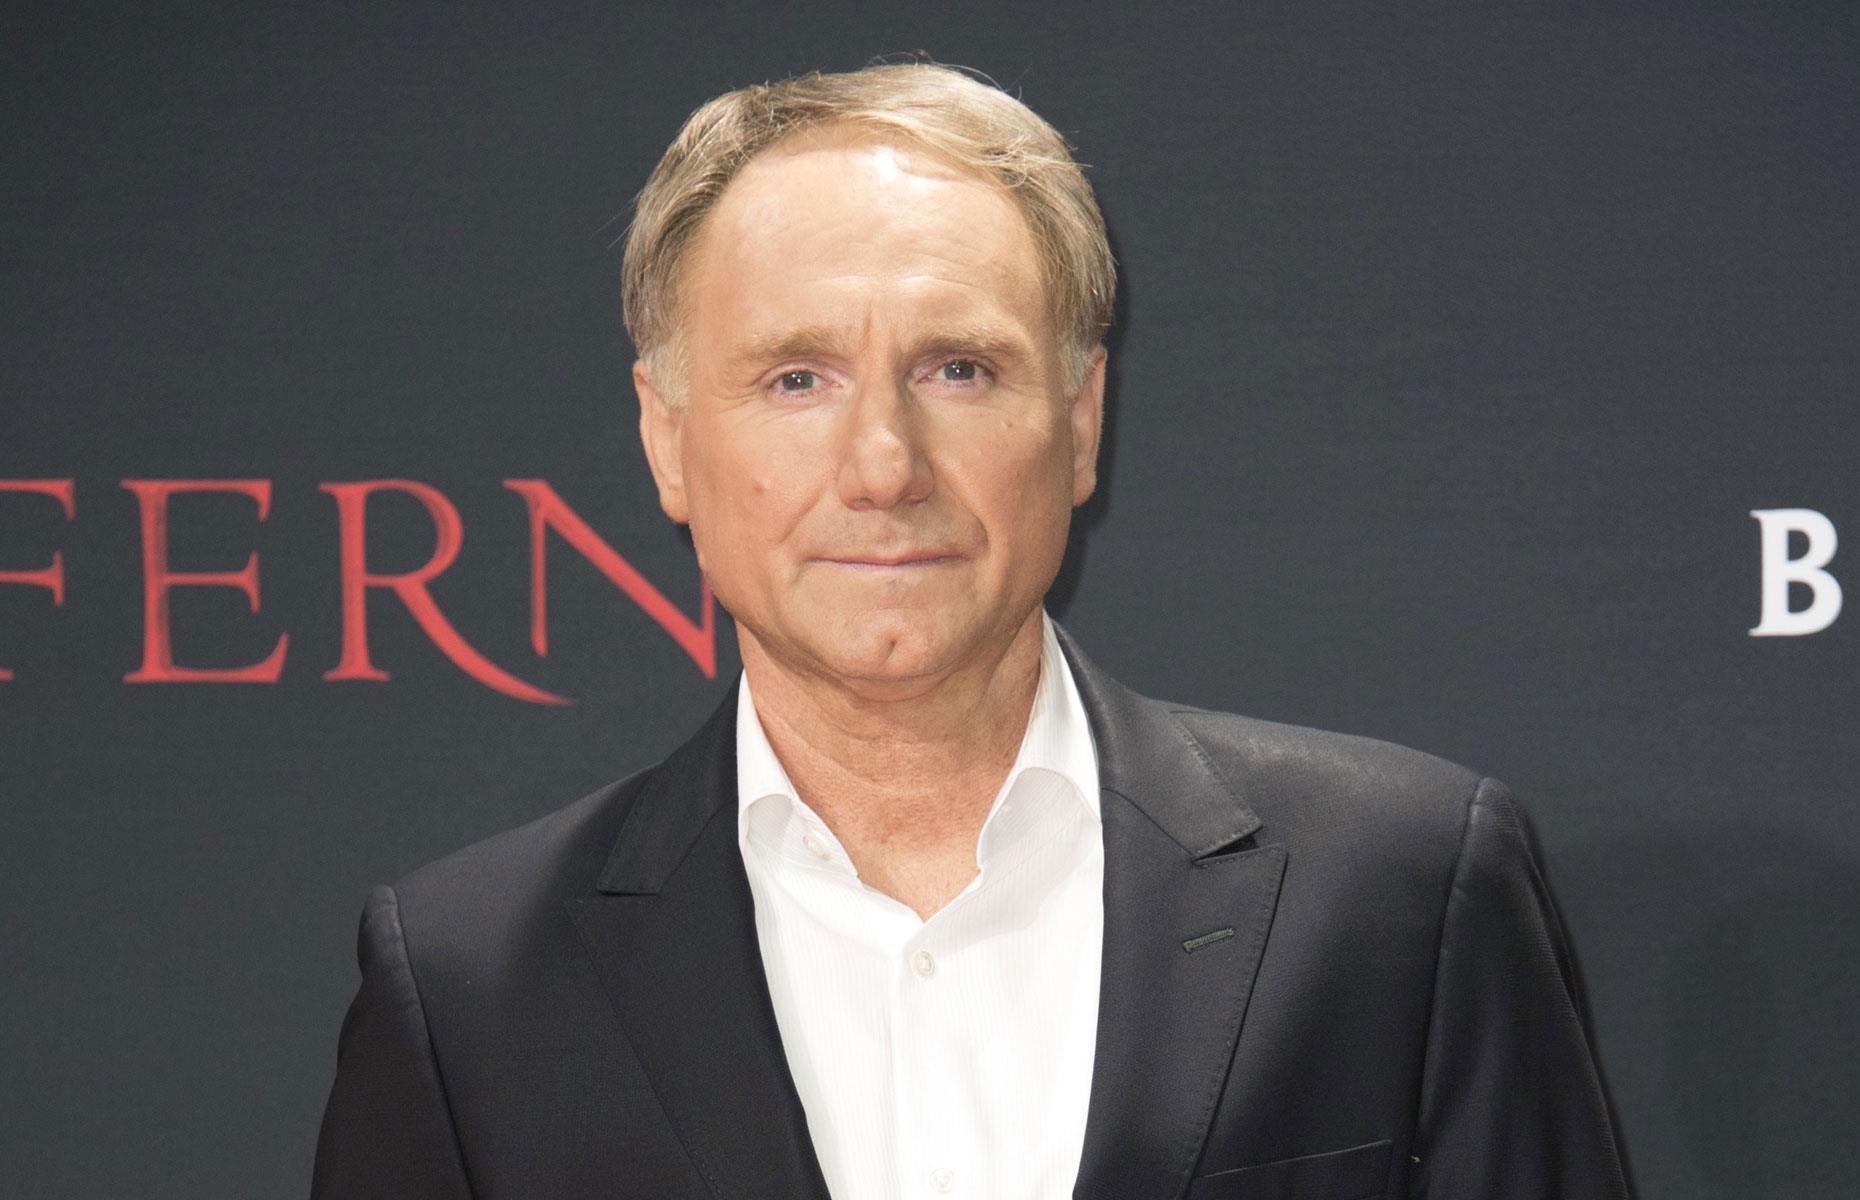 Dan Brown comes up with ideas upside down